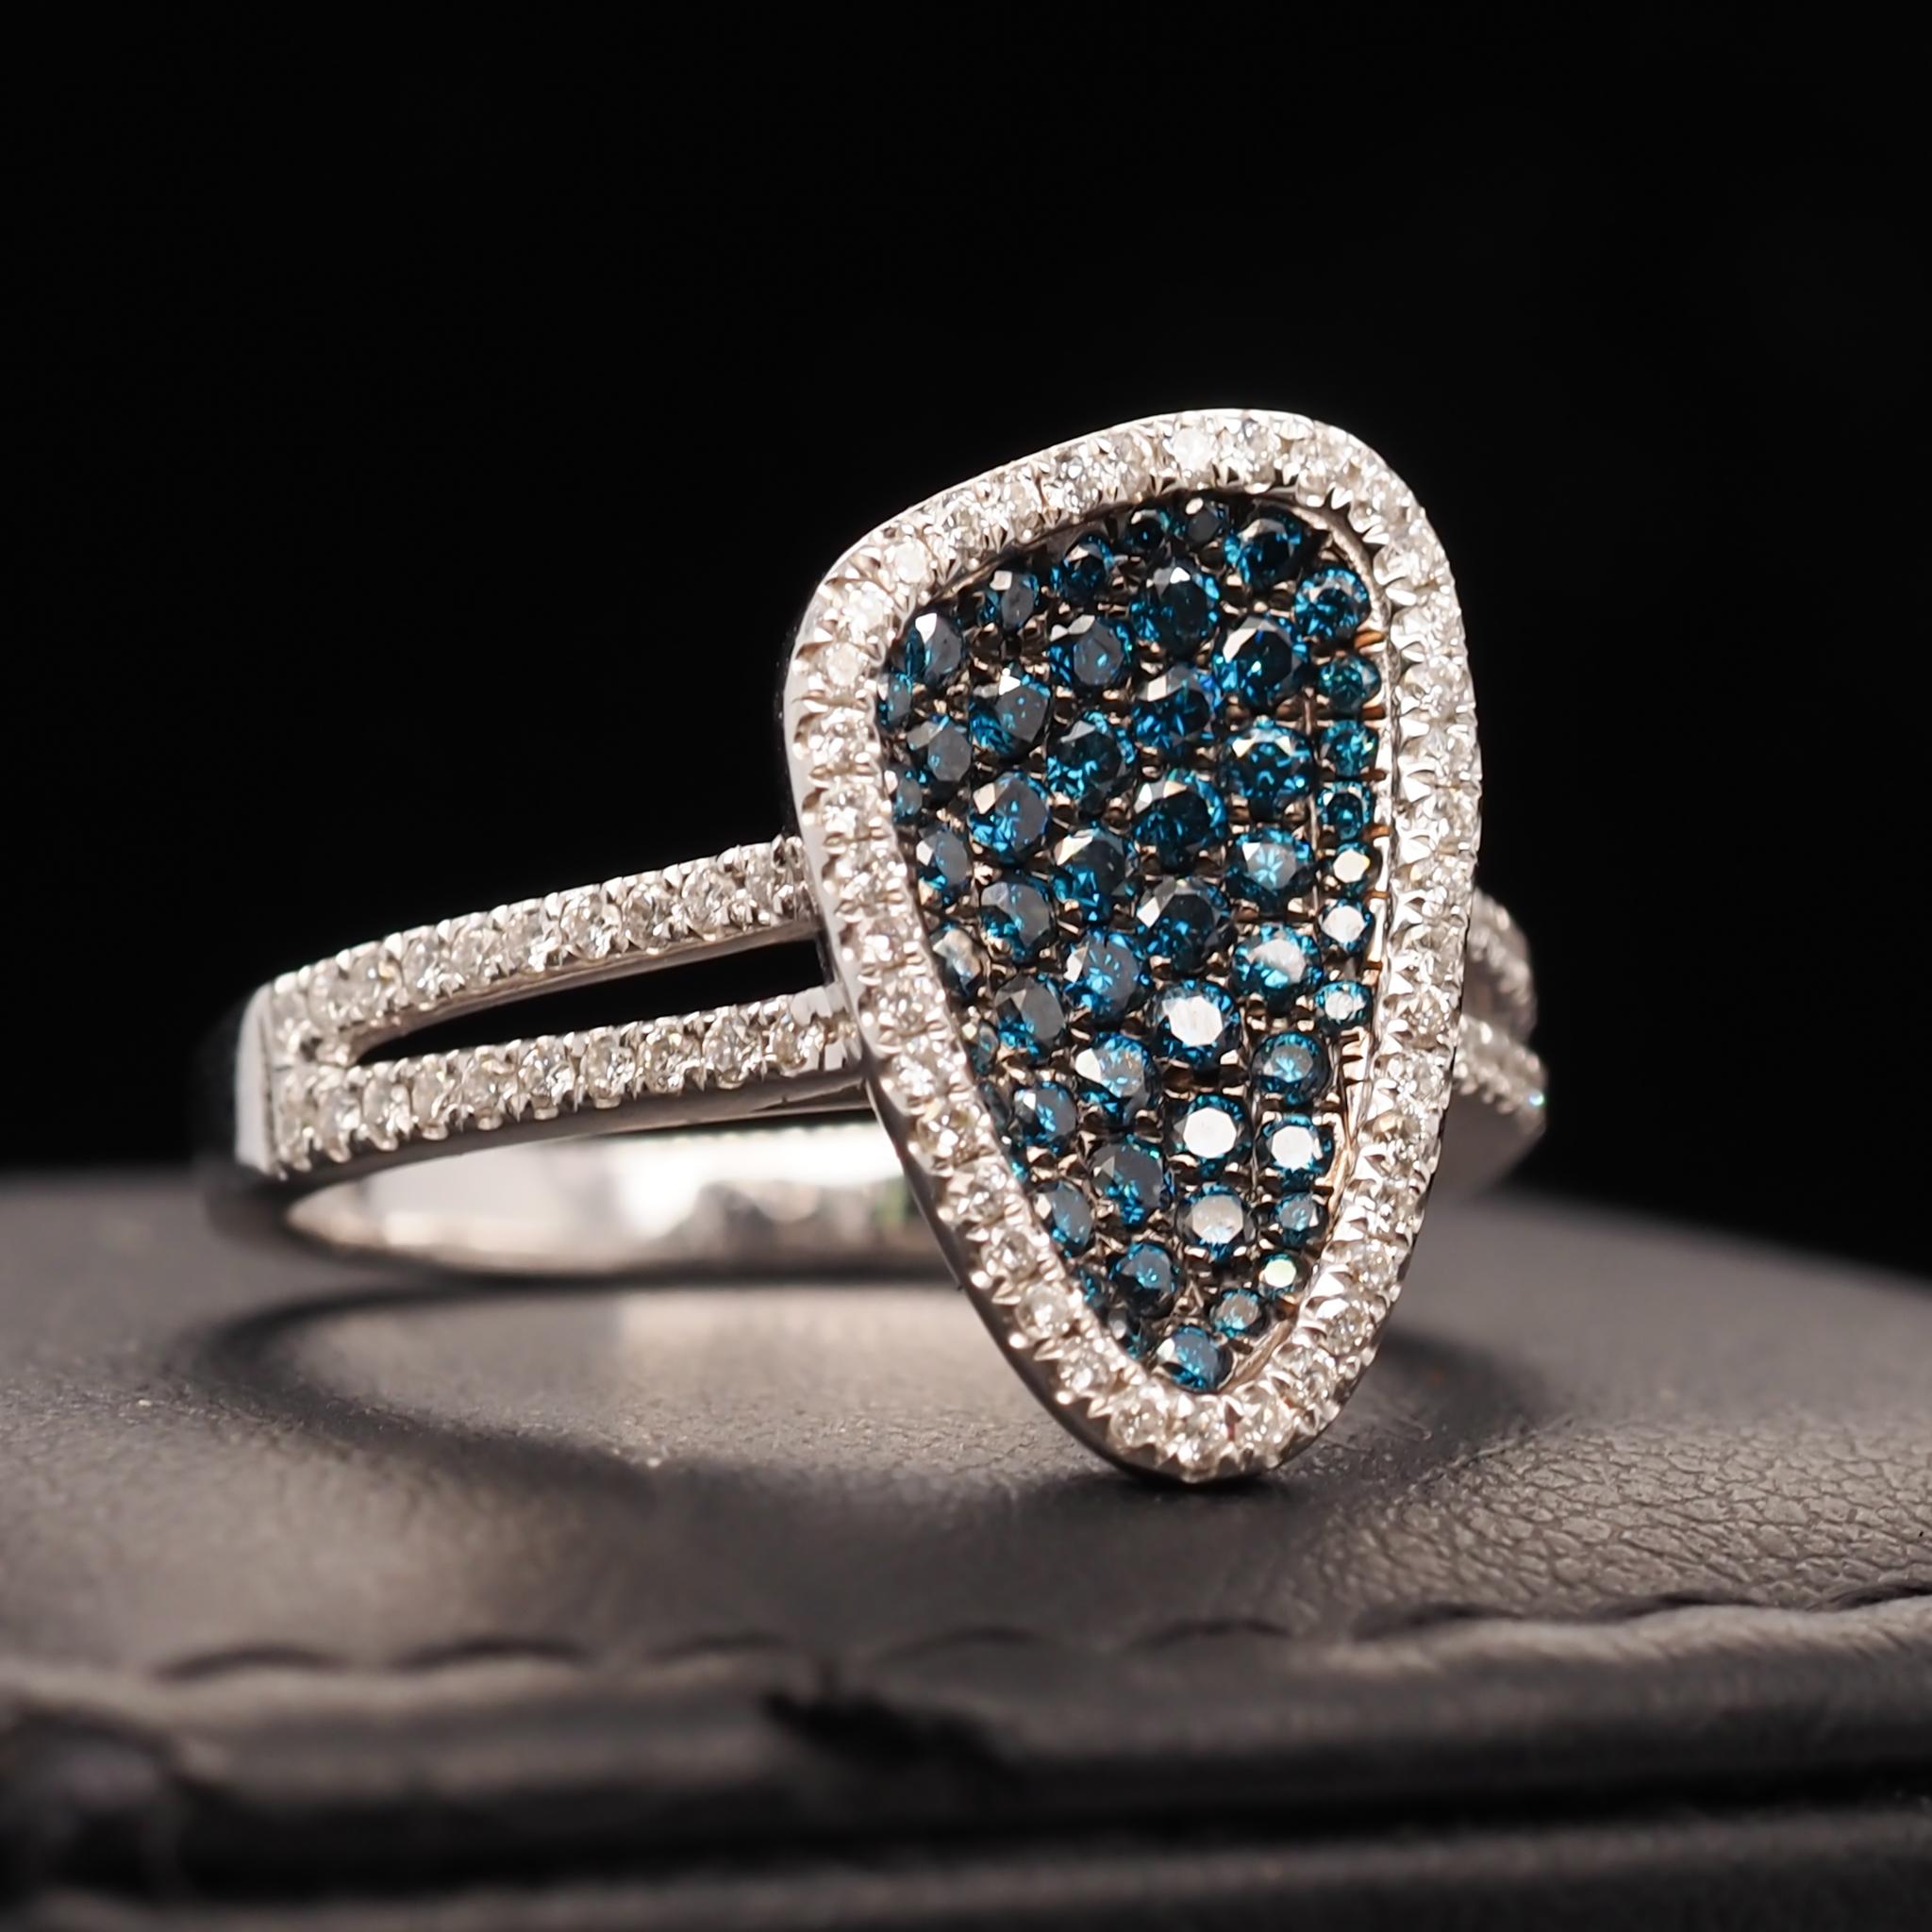 Year: 2000s

Item Details:
Ring Size: 6.75
Metal Type: 14K White Gold [Hallmarked, and Tested]
Weight: 4.6 grams

Diamond Details: 1.50ct total weight. Mixed G-H Color, Si clarity white diamonds and color treated natural blue diamonds.

Band Width: